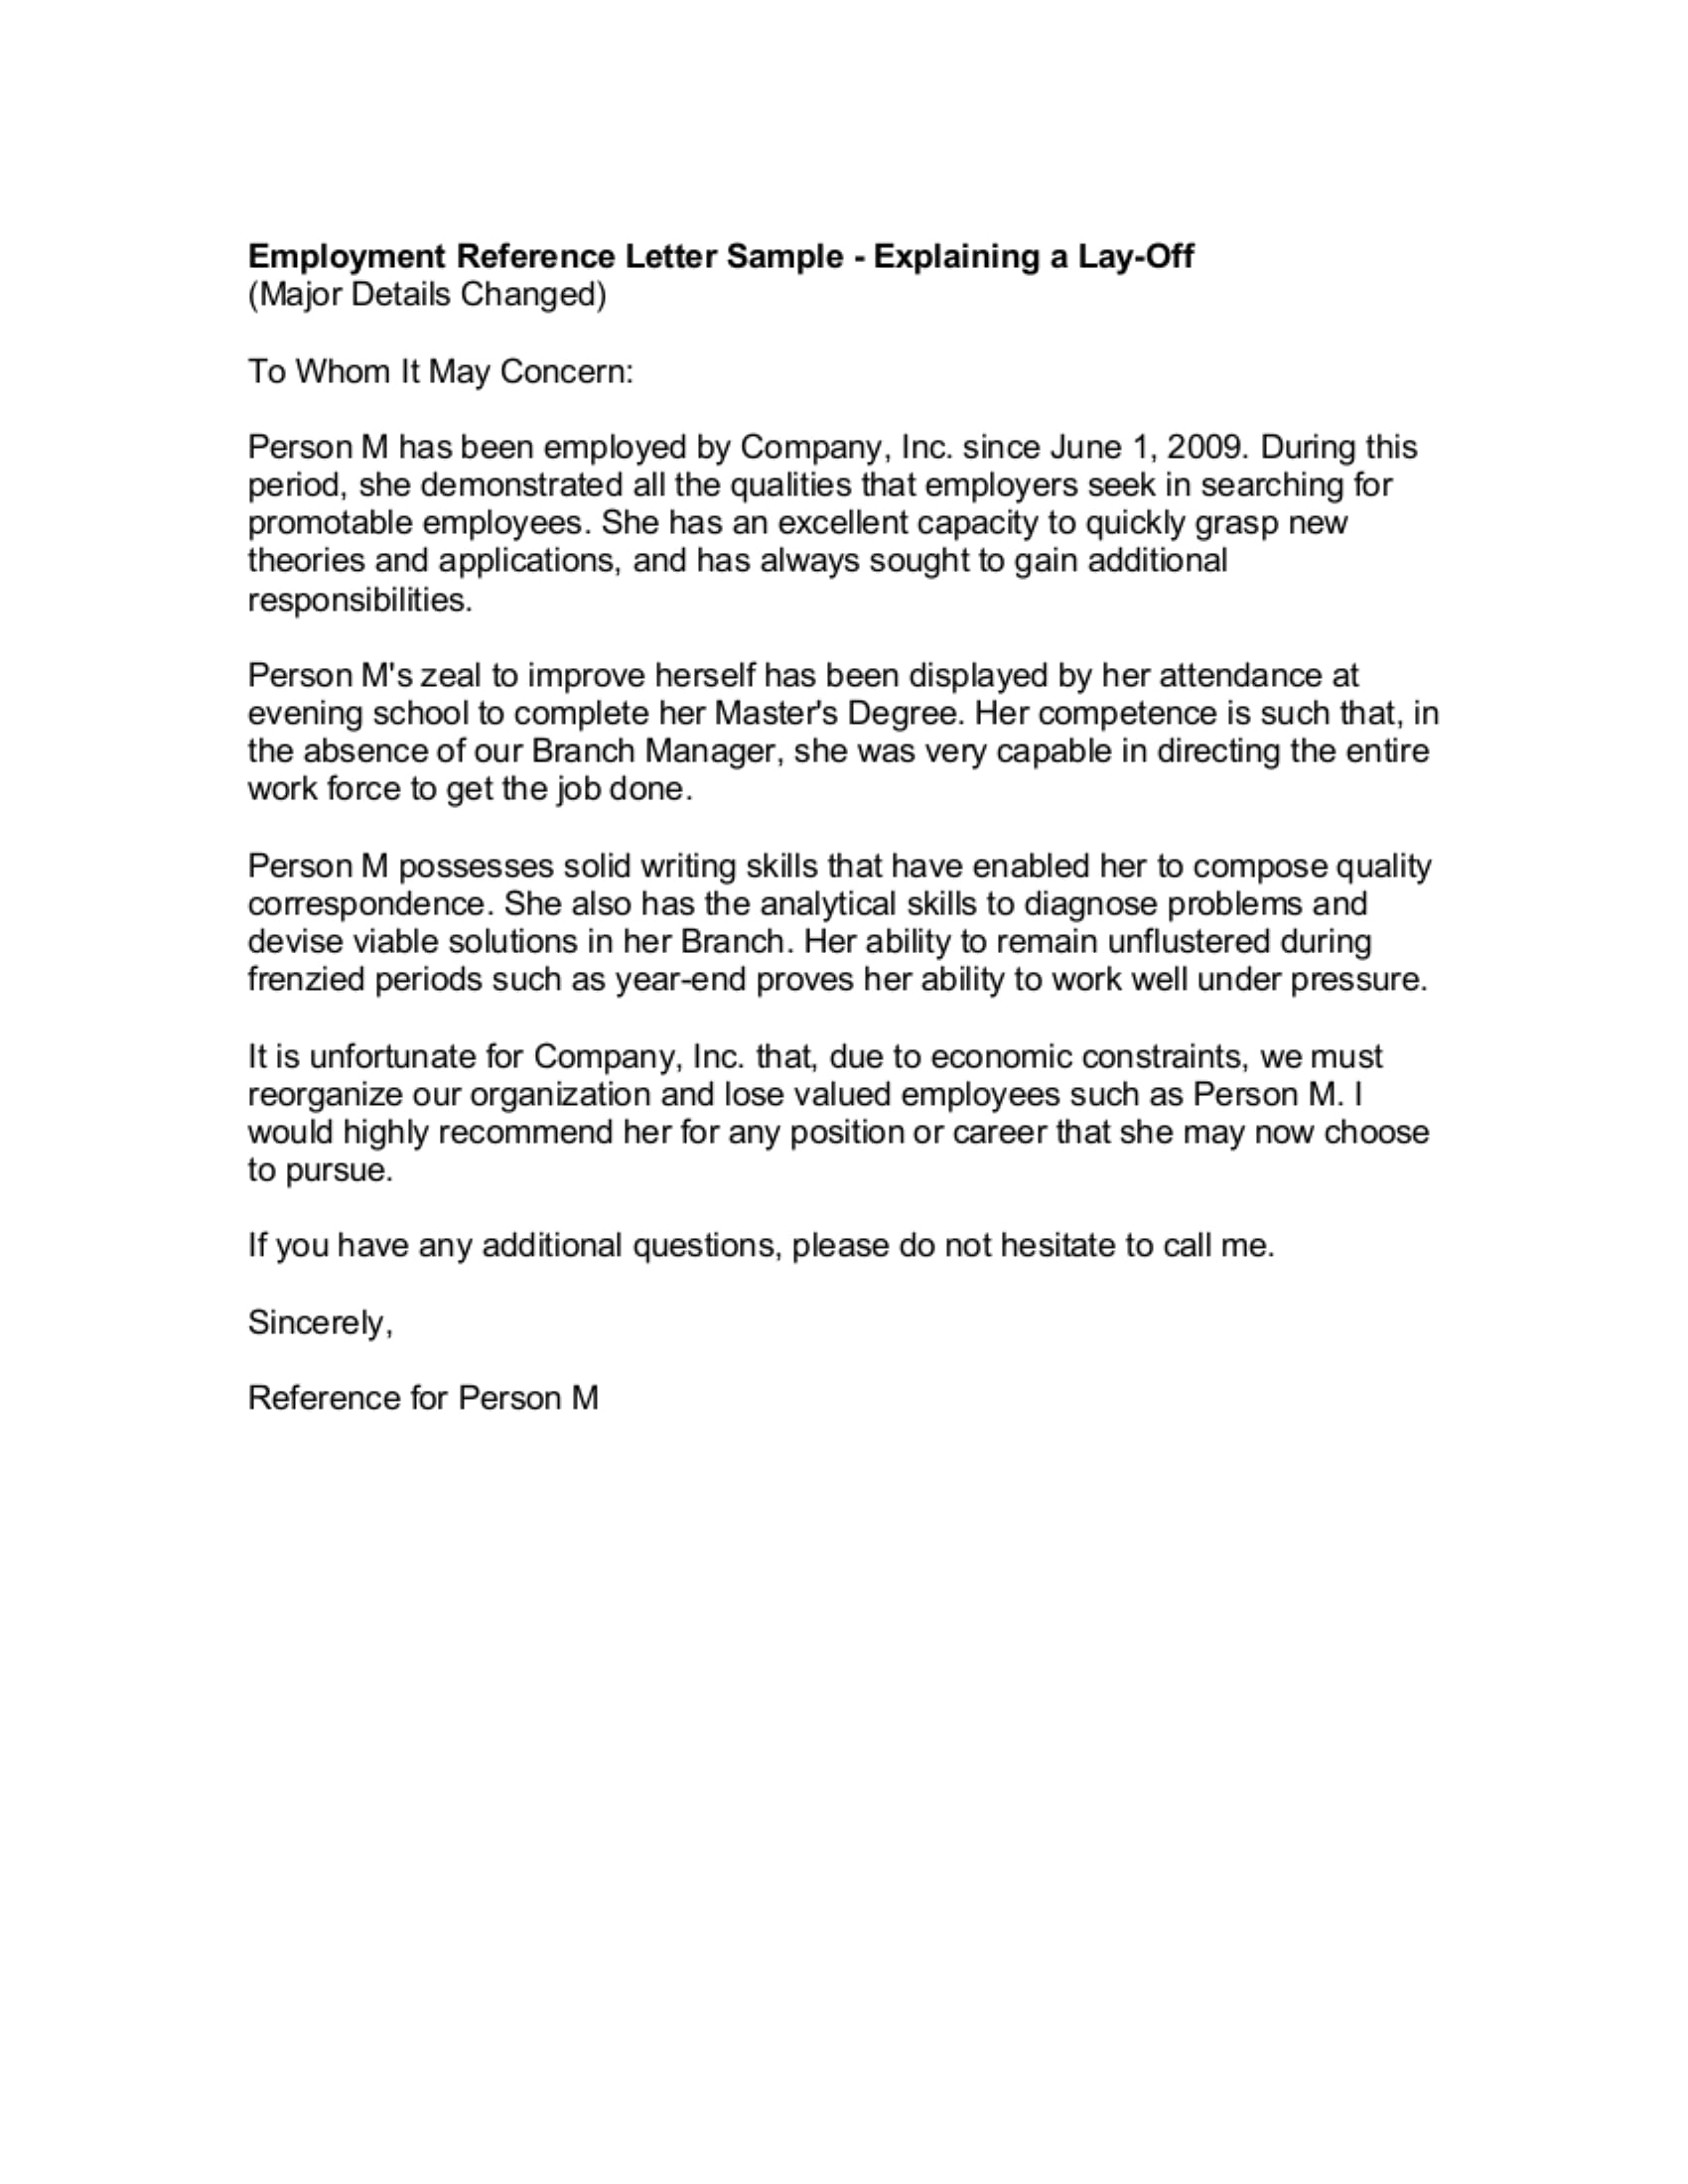 Employer Reference Letter Caflei throughout measurements 1700 X 2200